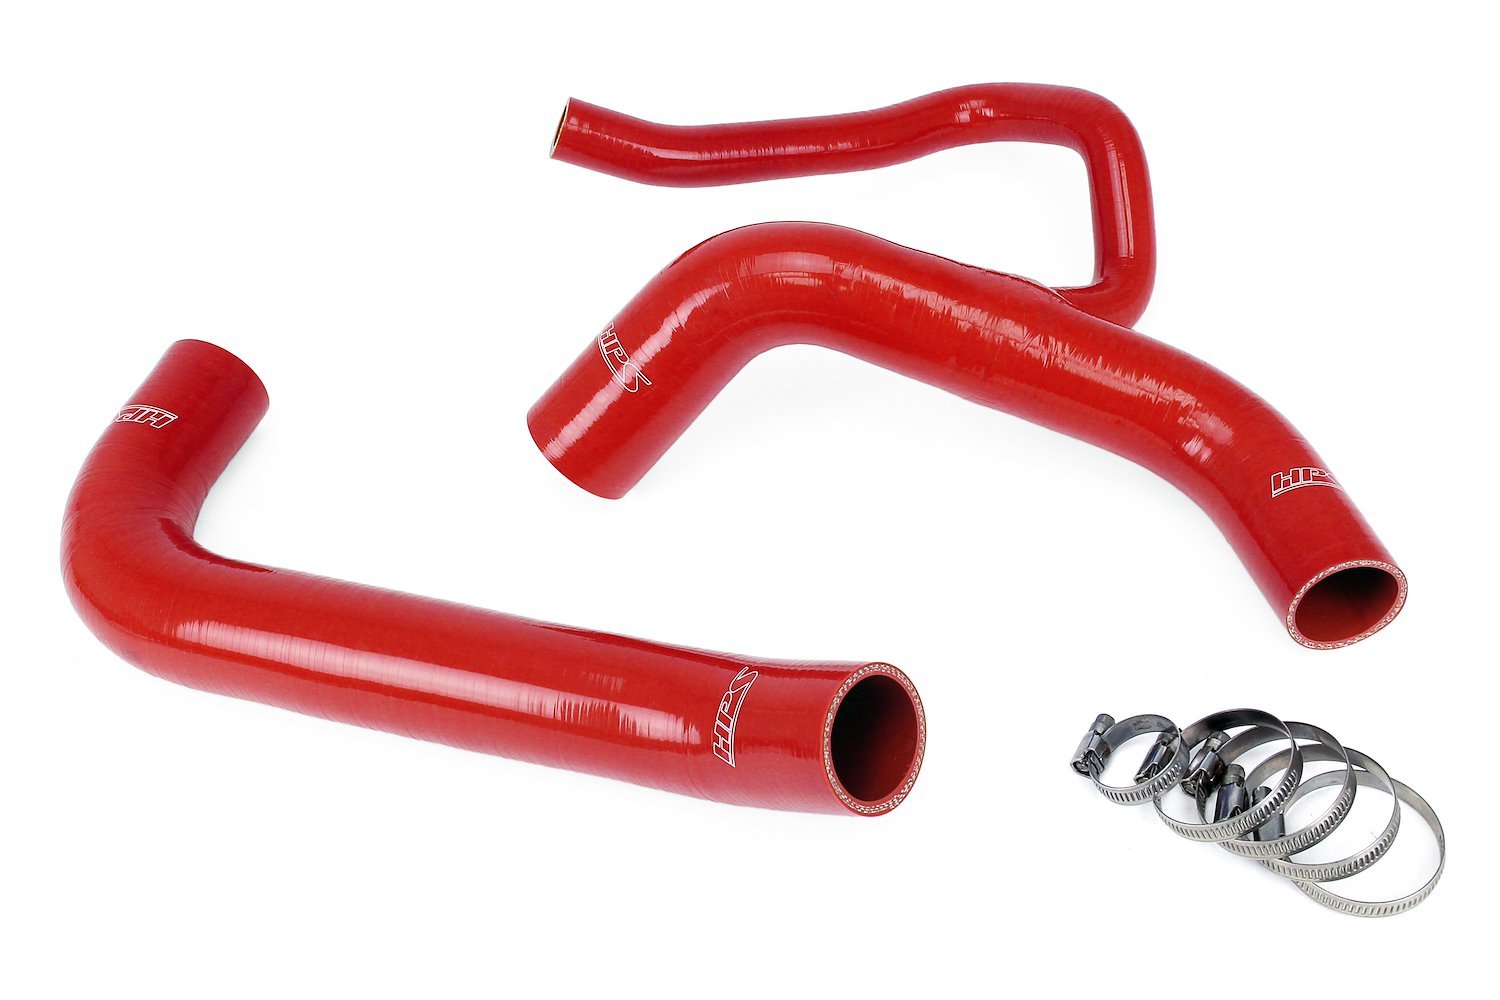 57-1848-RED Radiator Hose Kit, 3-Ply Reinforced Silicone, Replaces Rubber Radiator Coolant Hoses